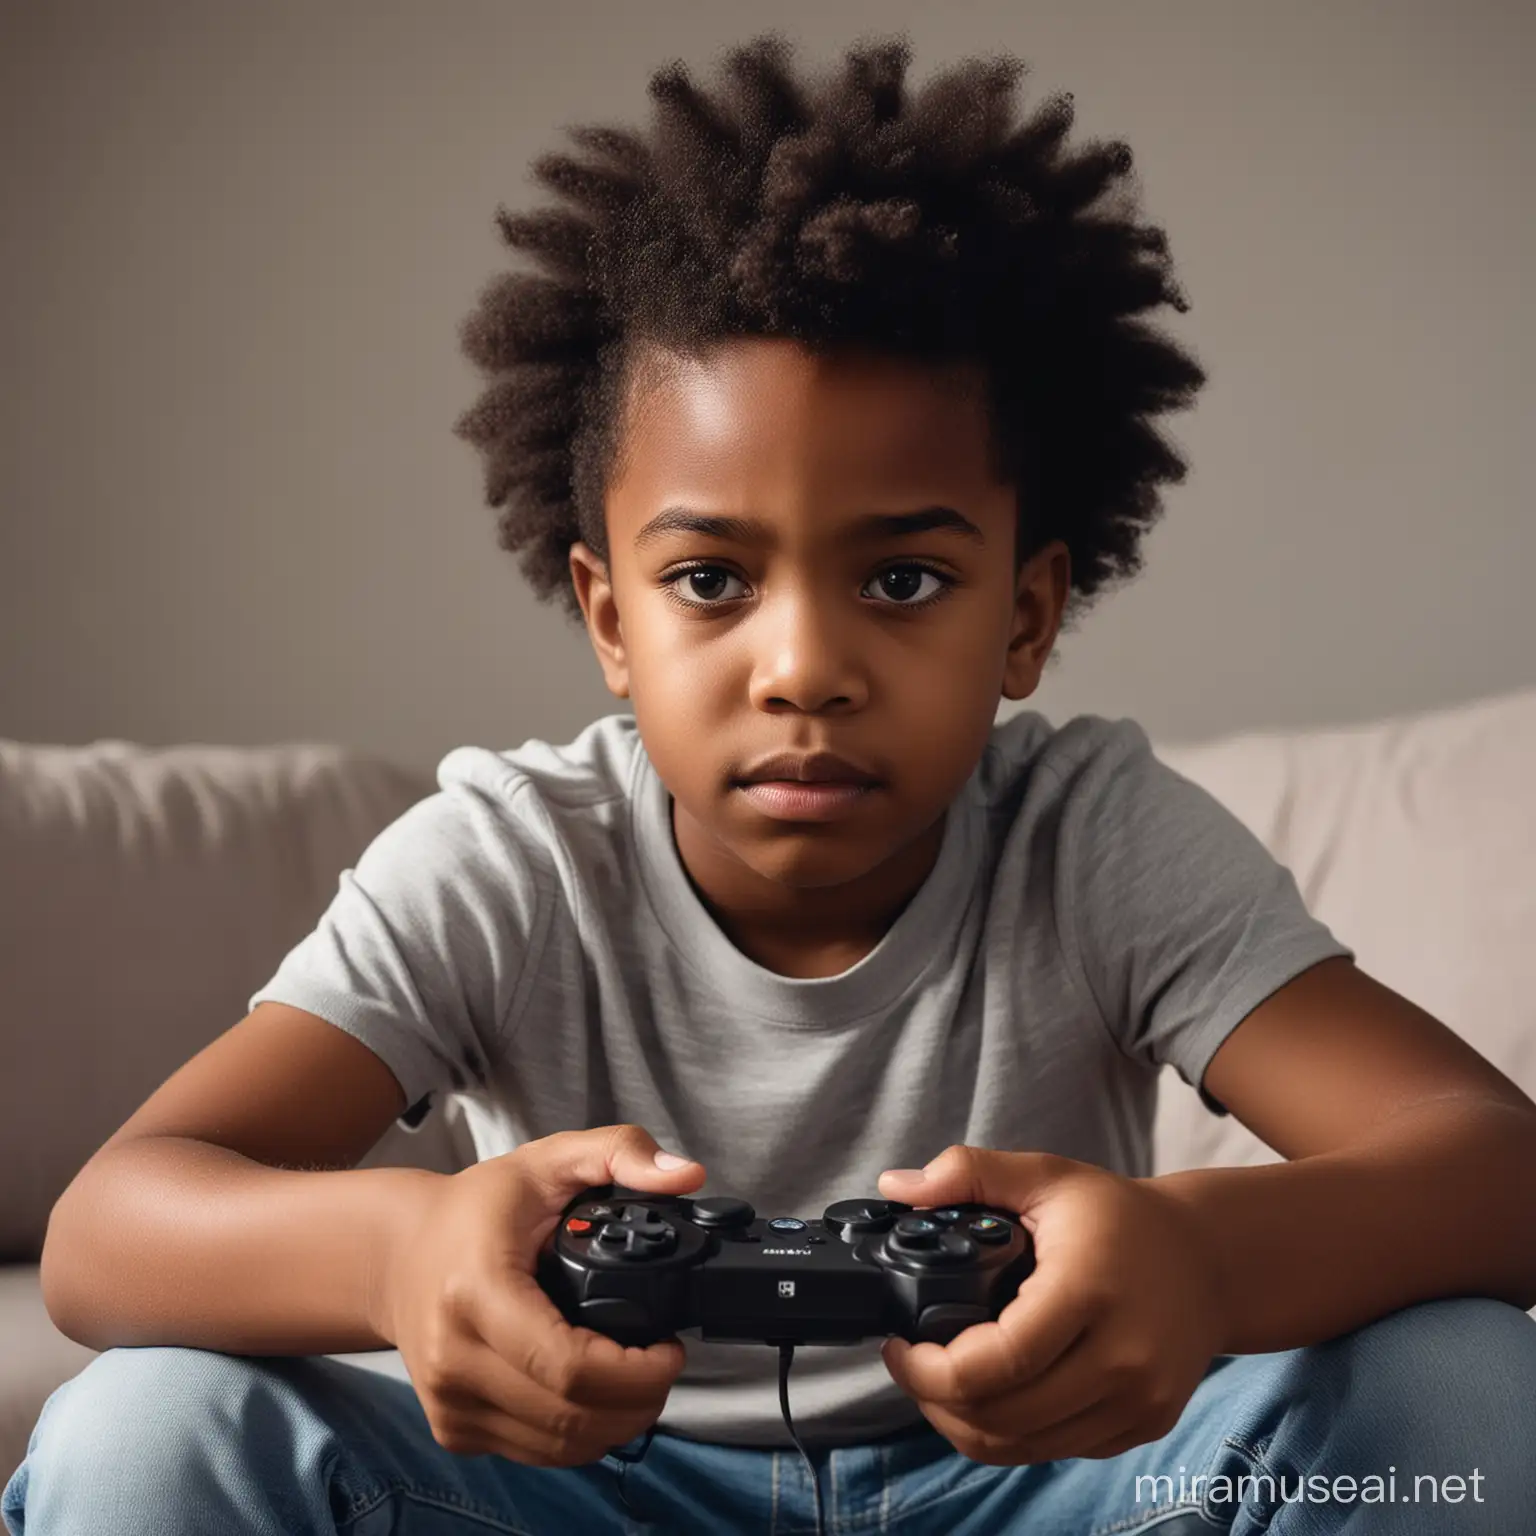 Black child playing video game looking serious
